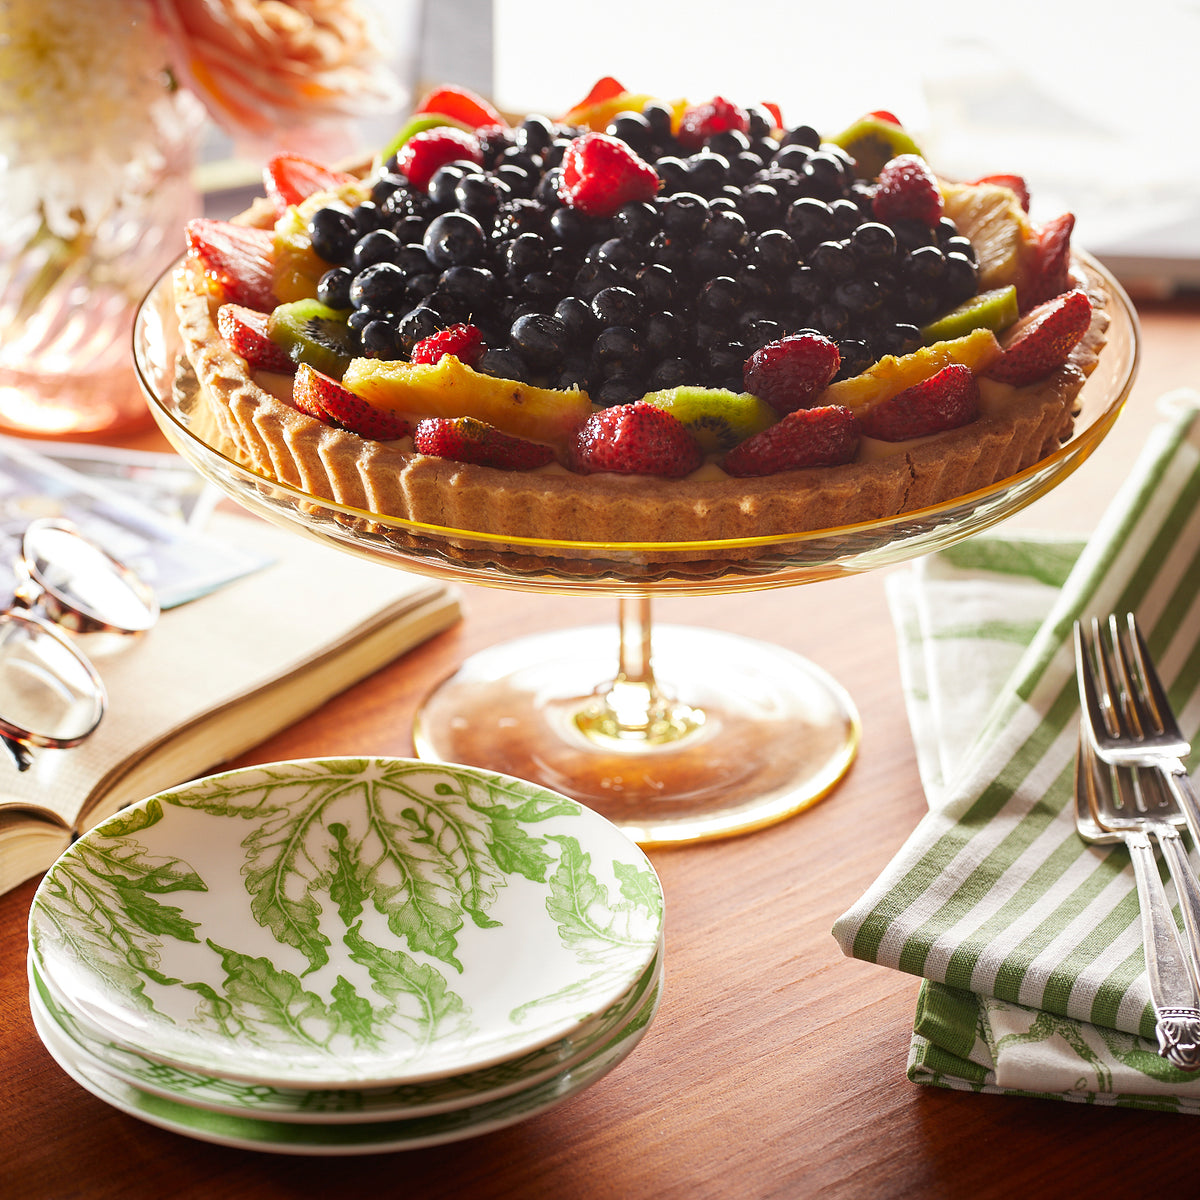 Fruit tart topped with blueberries, strawberries, and kiwi on a glass stand. Surrounding items include heirloom-quality dinnerware, Caskata Artisanal Home&#39;s Freya Small Plates with a green floral pattern, fork and knife, glasses, book, and a green striped napkin.